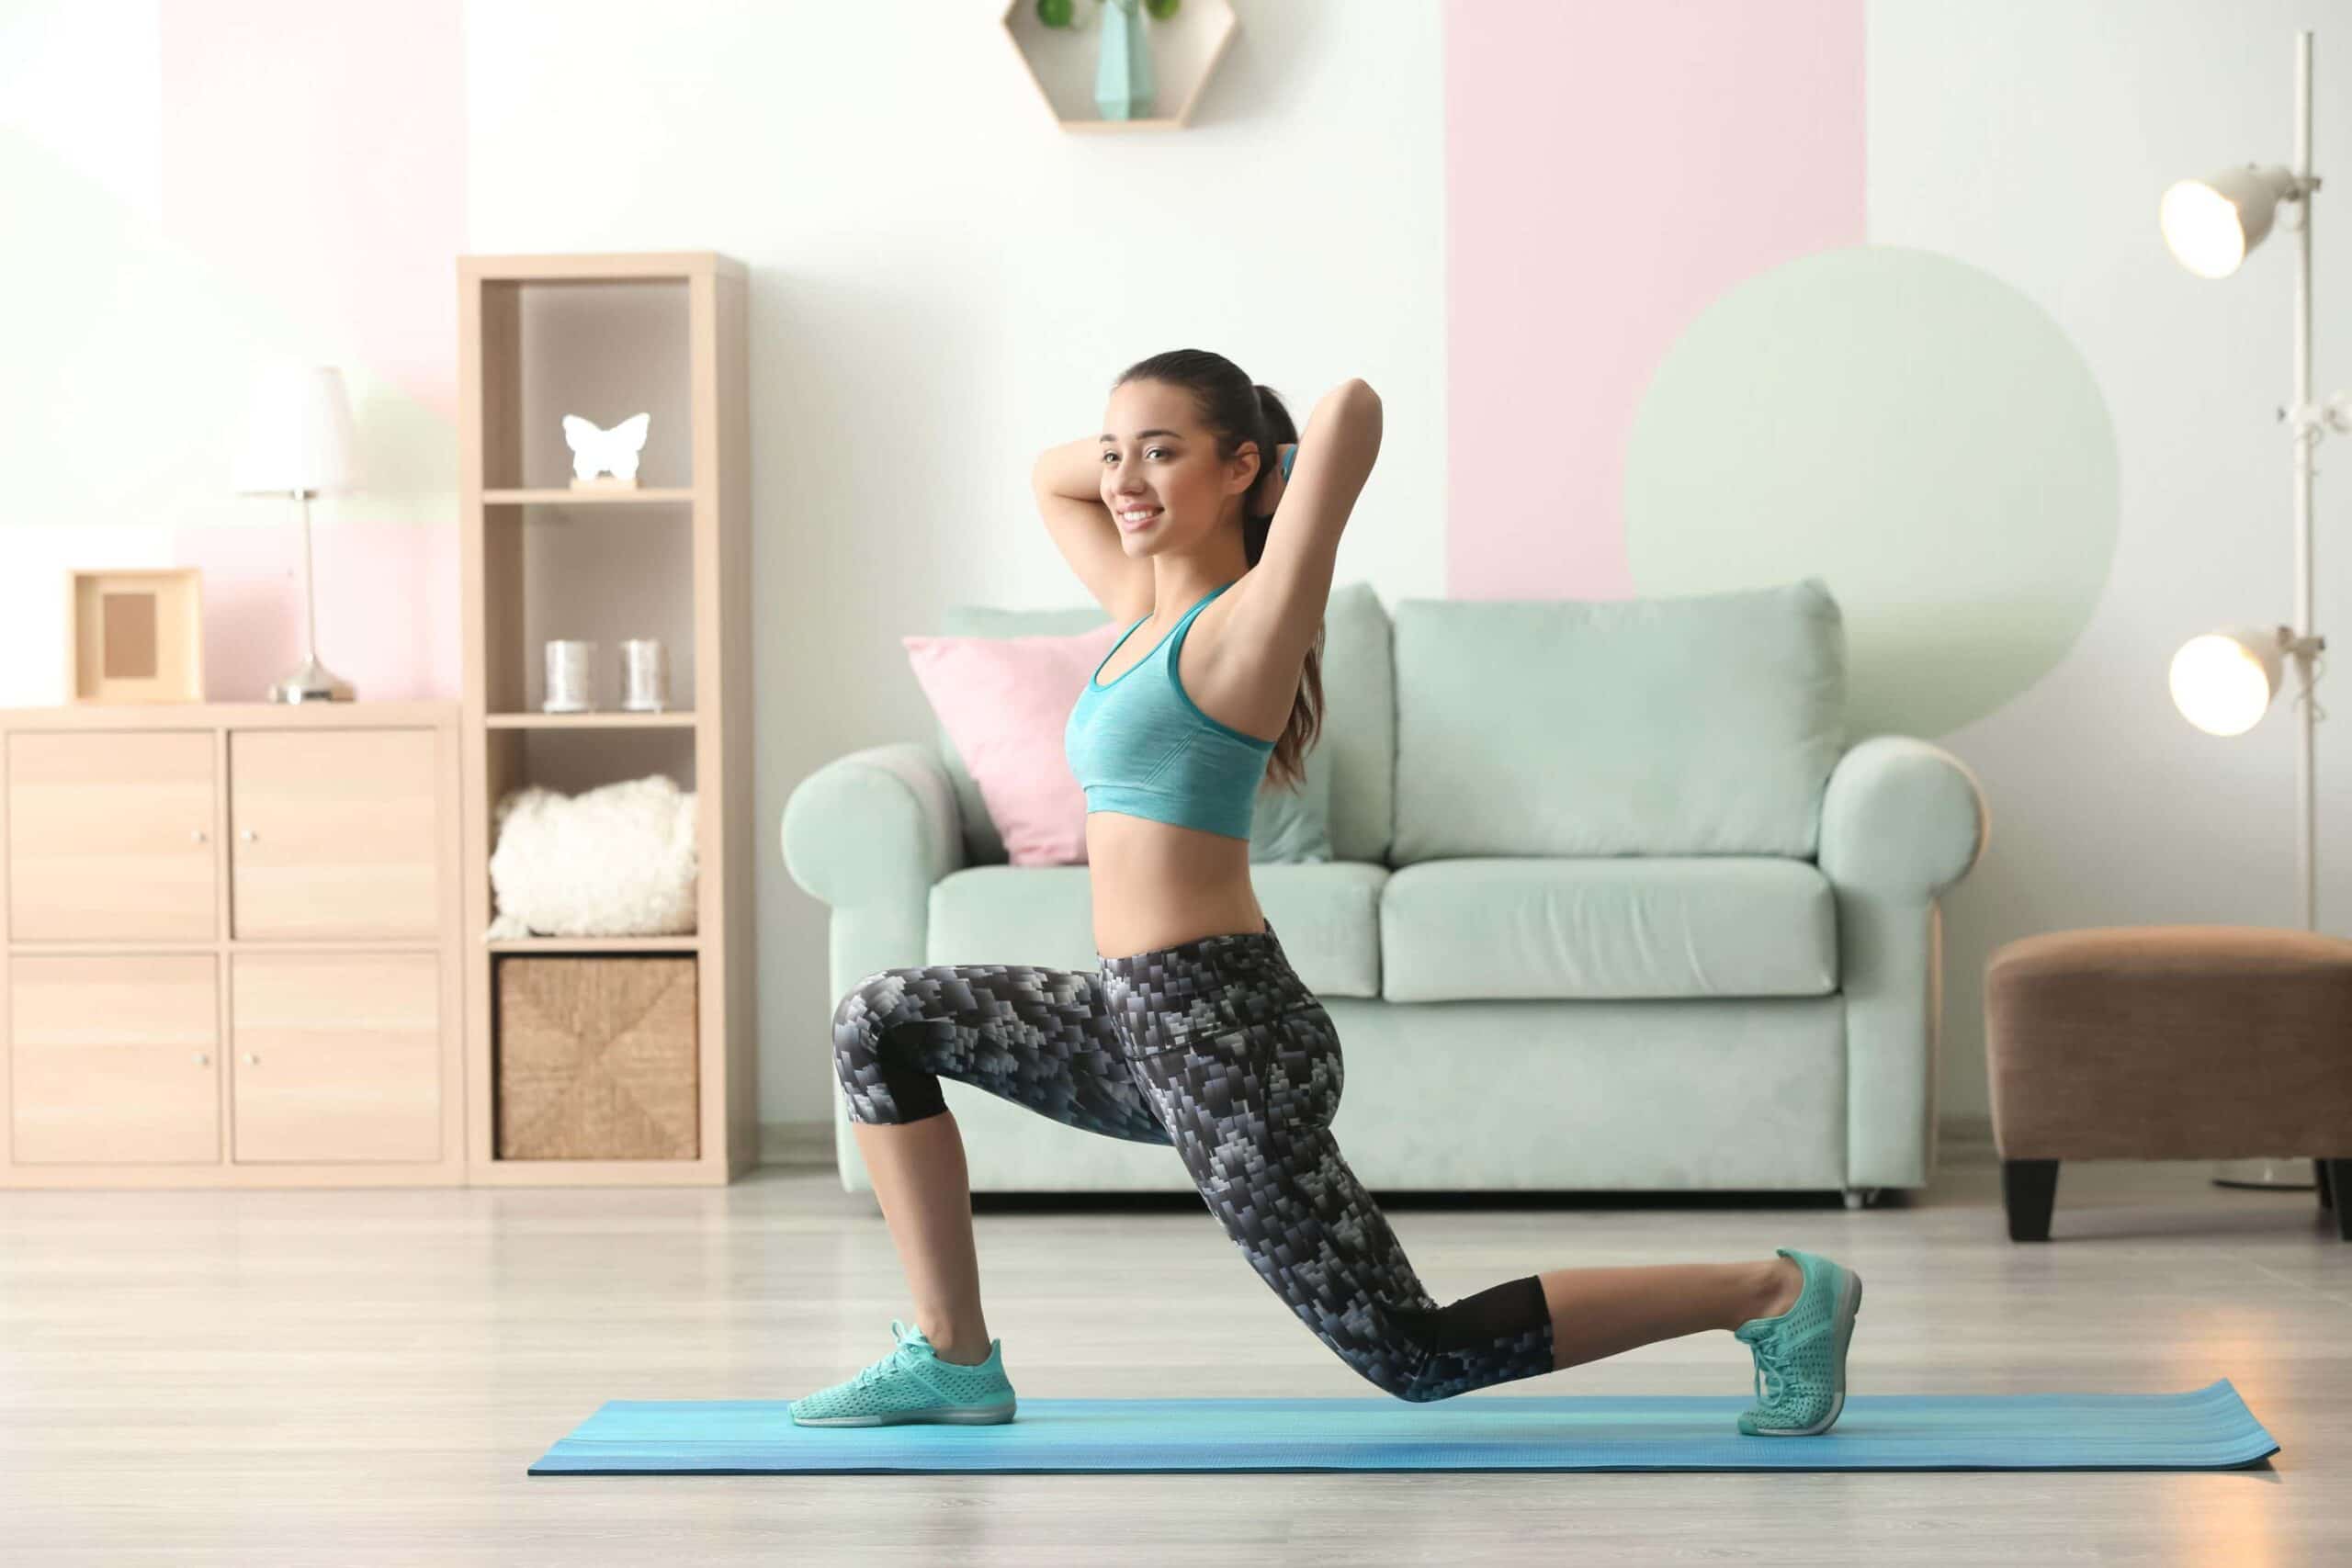 Easy exercises to do at home